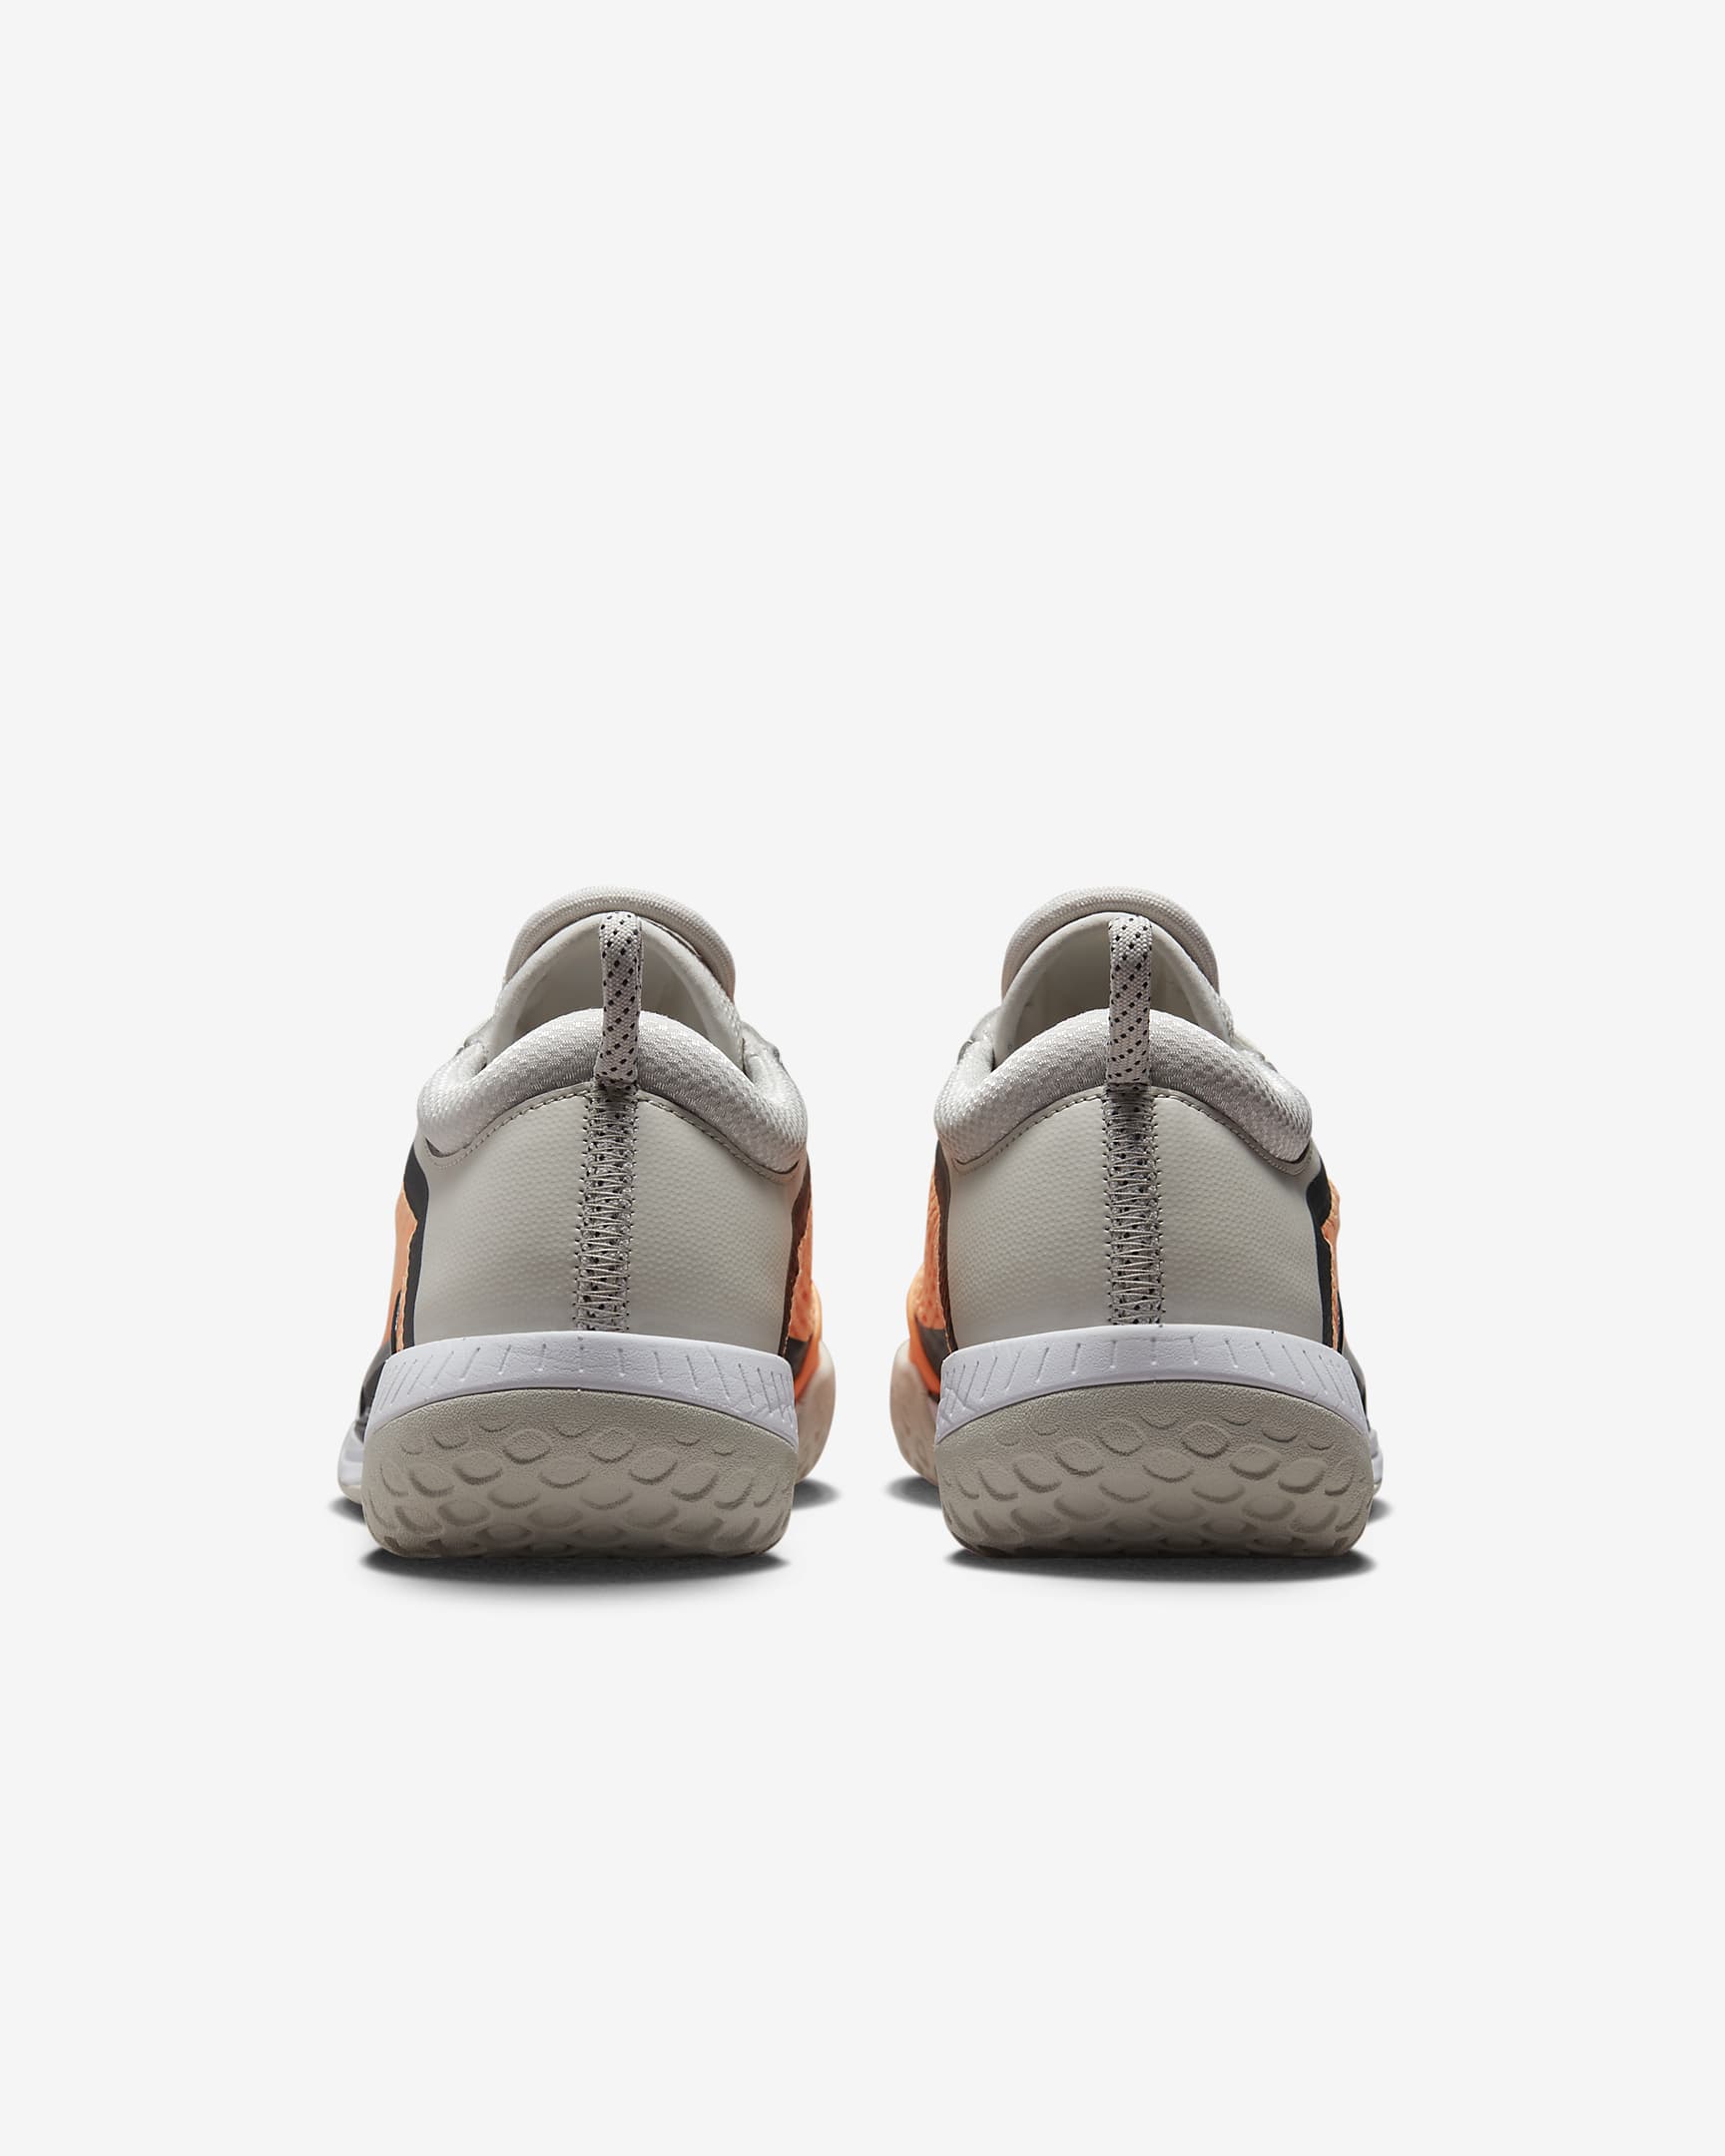 nikecourt-zoom-nxt-hard-court-tennis-shoes-s7vtzg.png